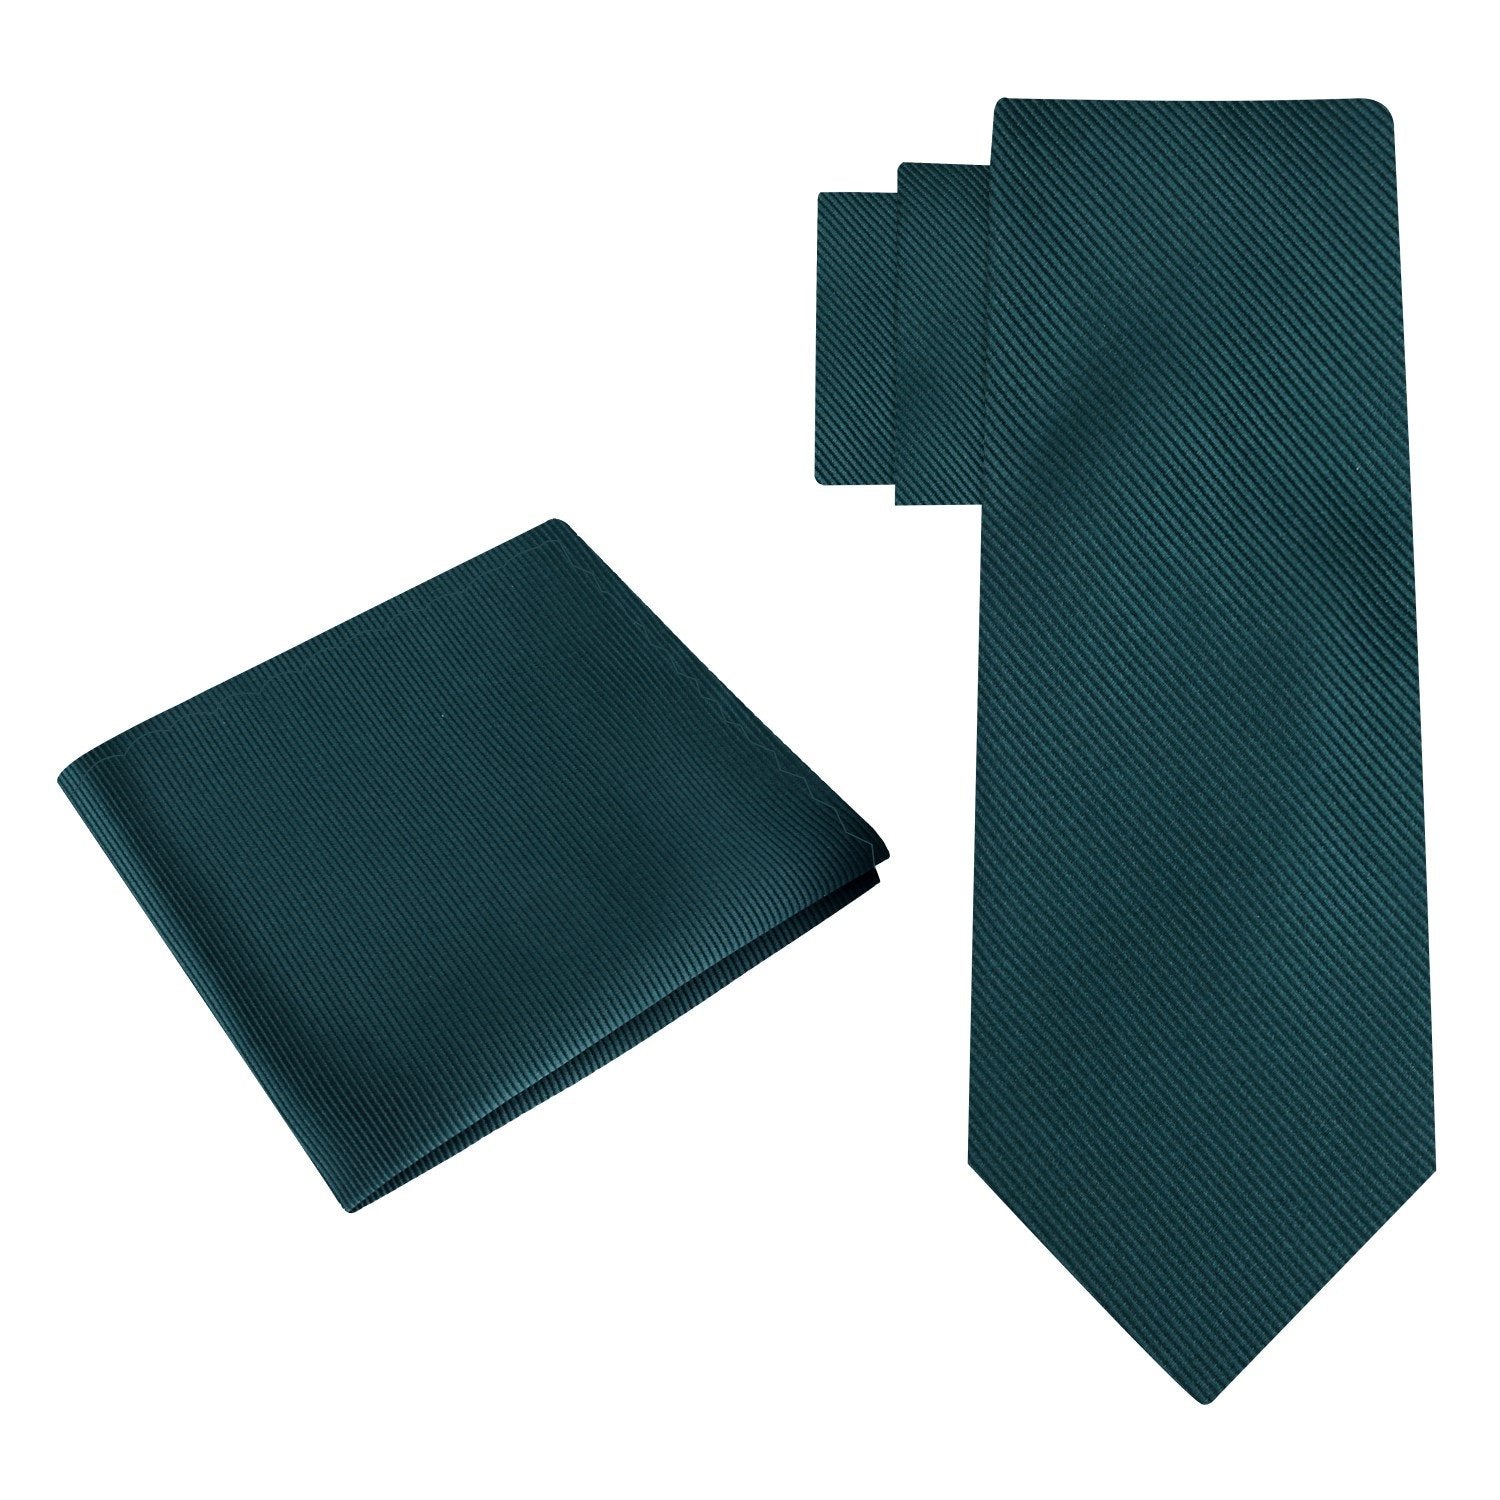 Alt View: Solid Sea Green Tie and Square